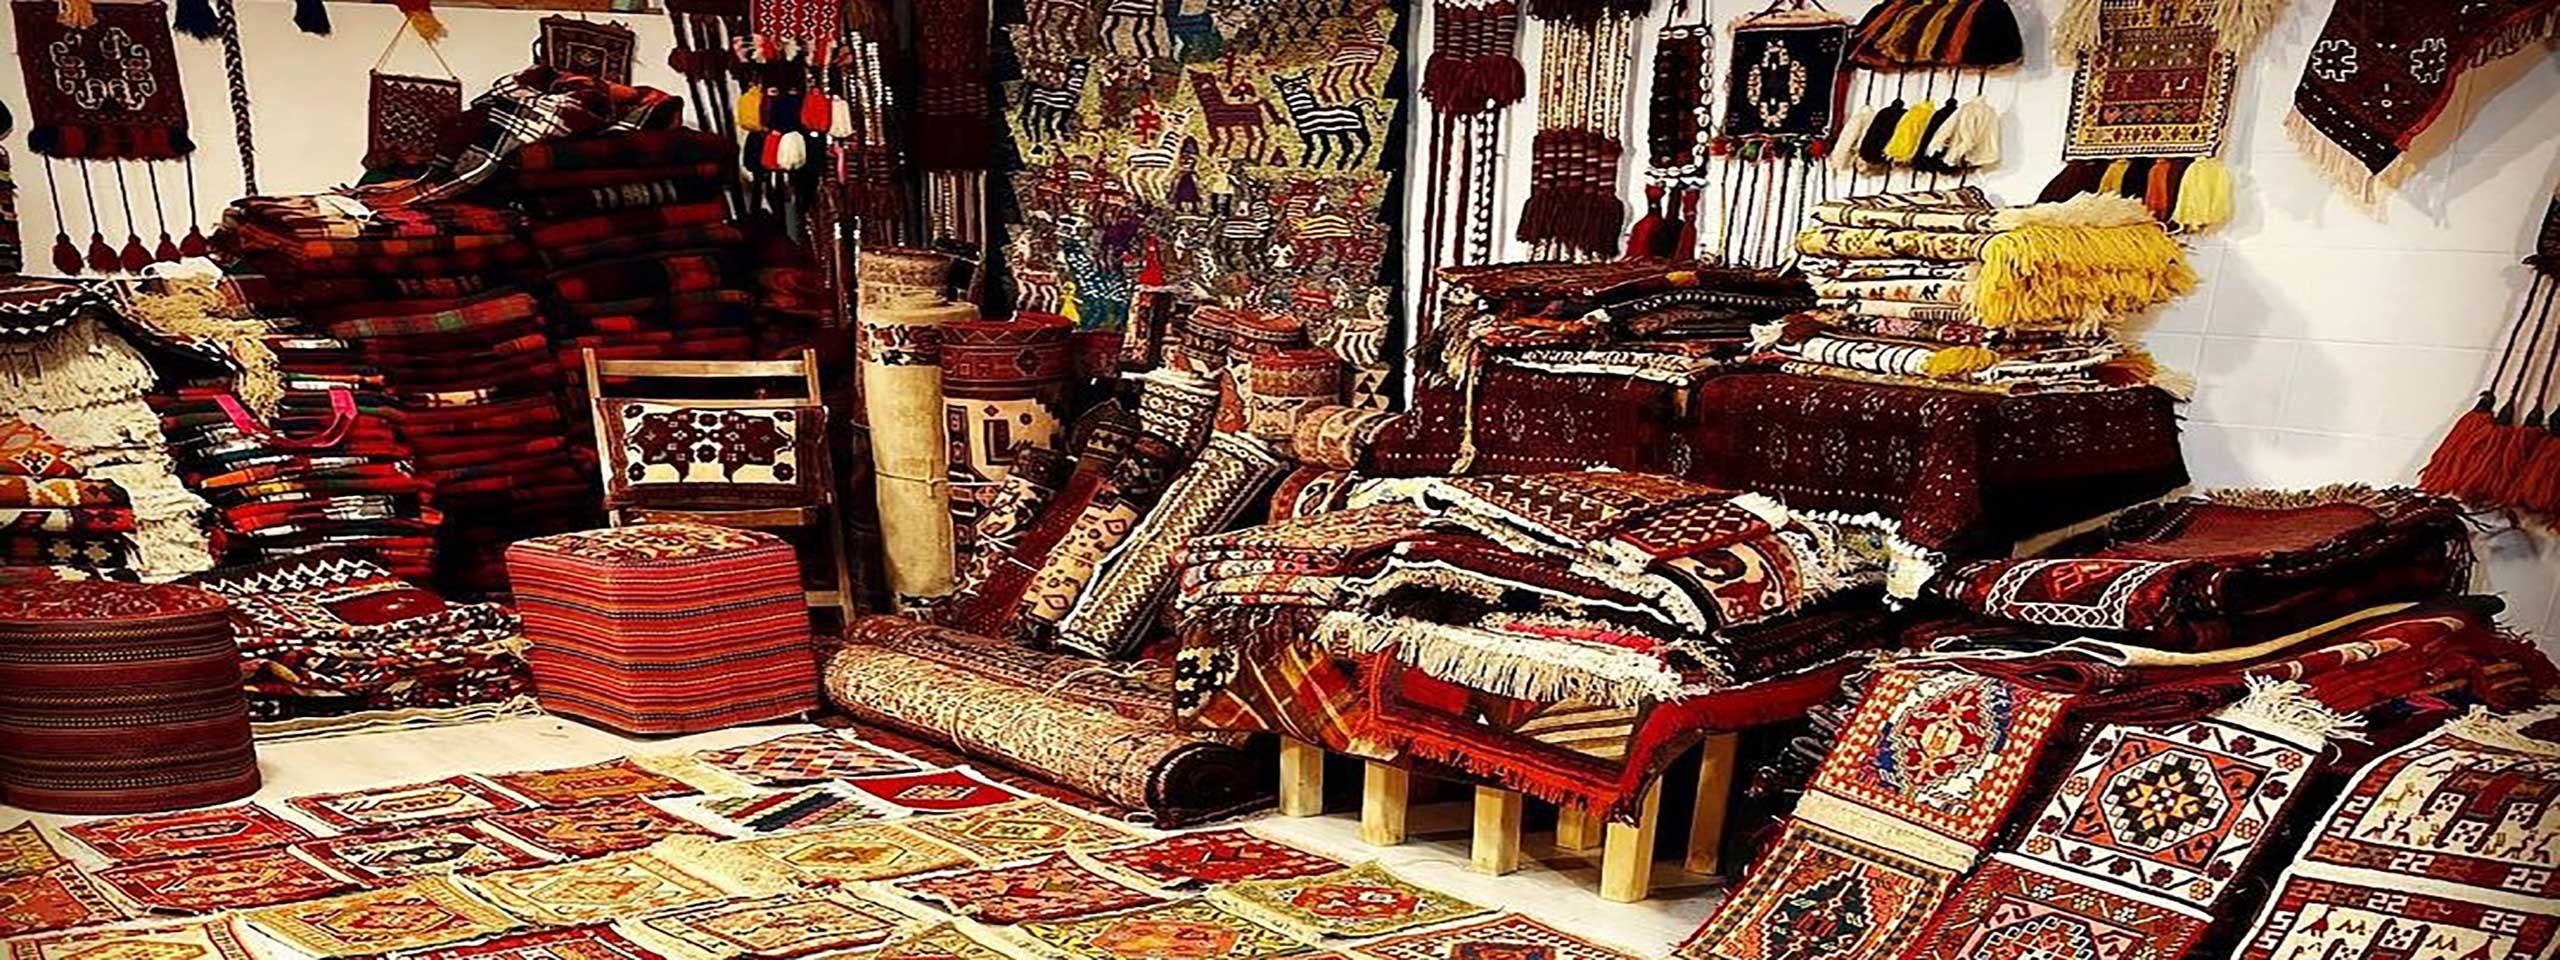 What is a Persian carpet and what are the types of Persian carpets?